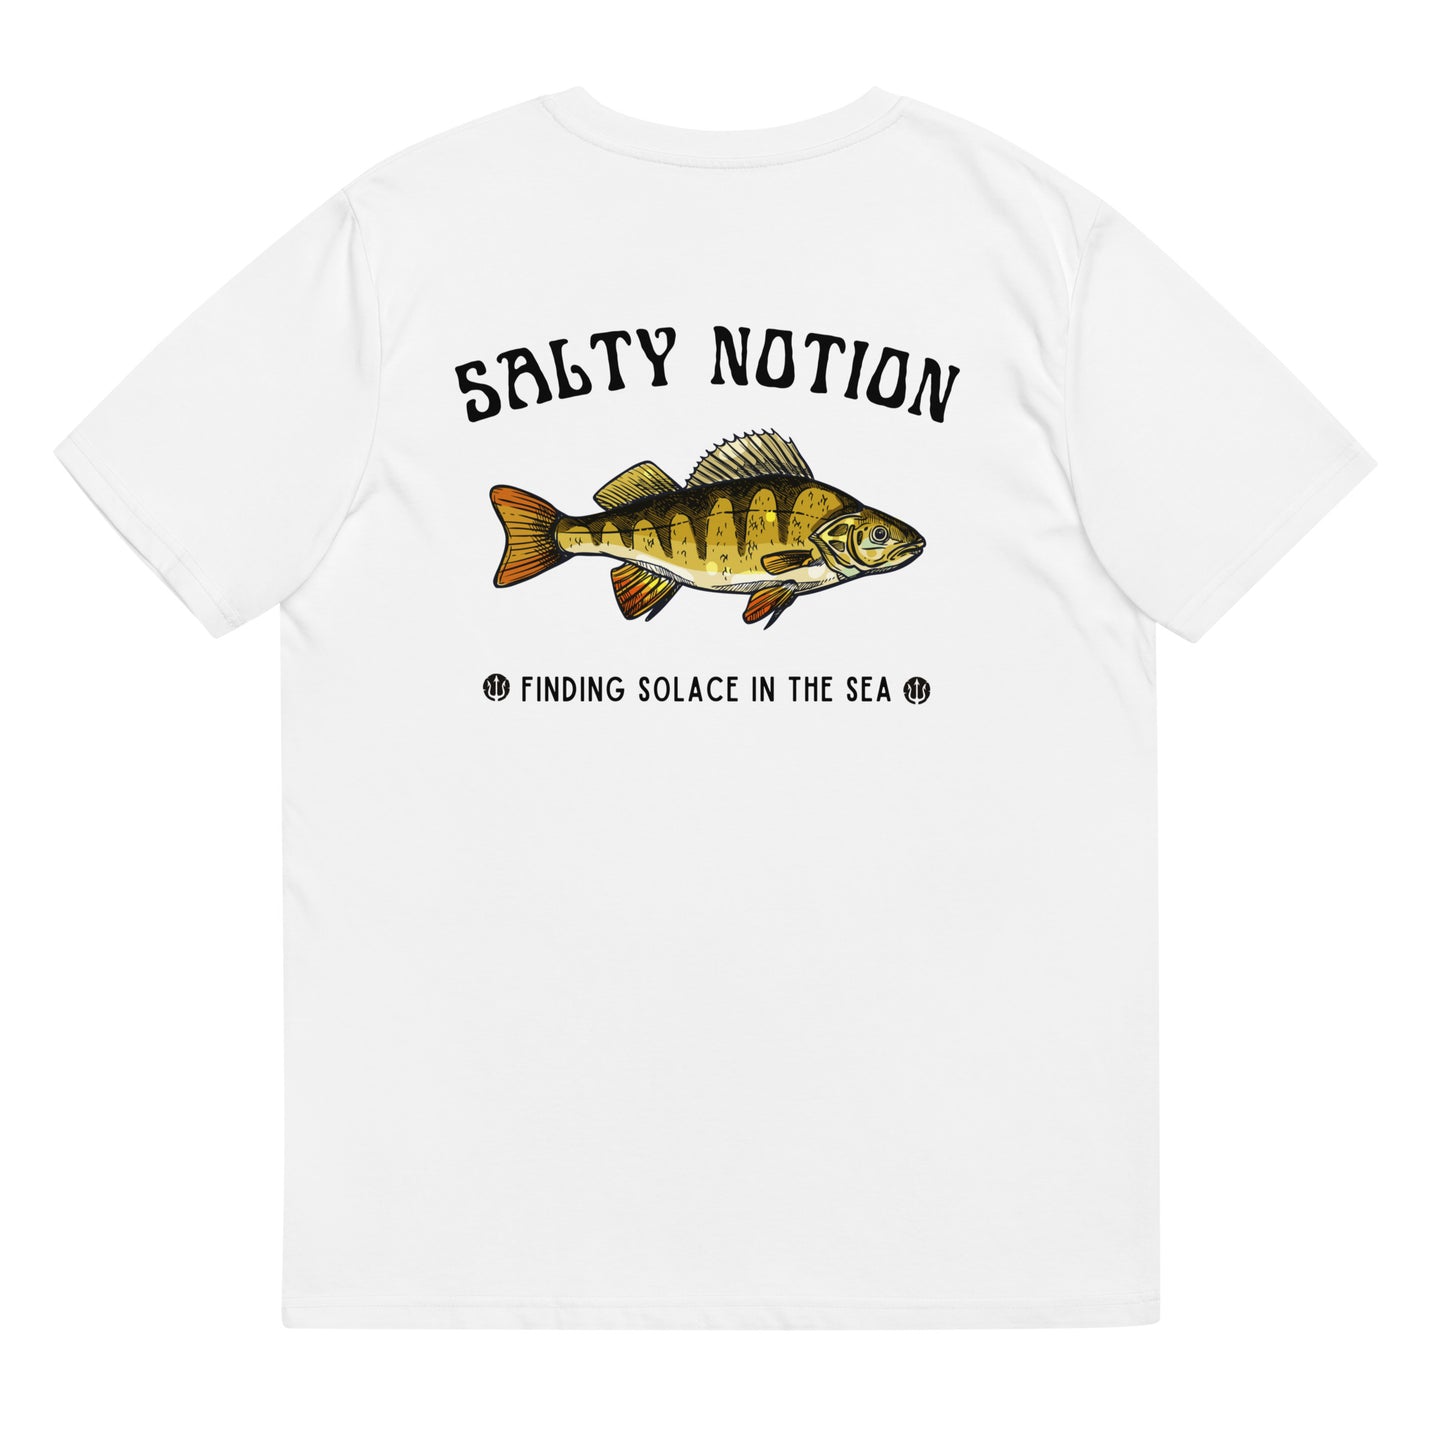 Find solace in the sea organic cotton t-shirt